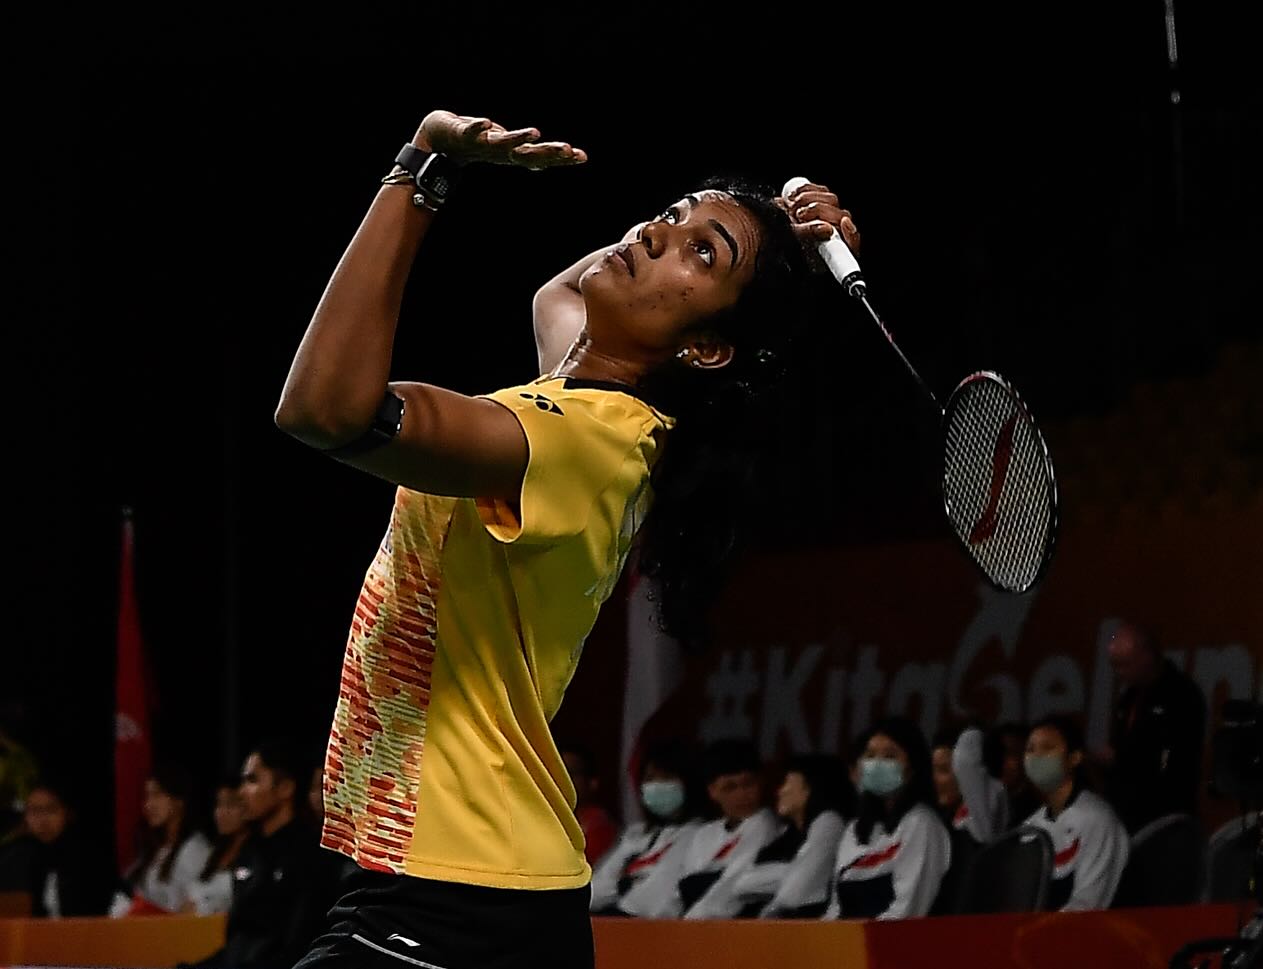 Sindhu’s road to redemption: battling injury, eyeing Olympic gold